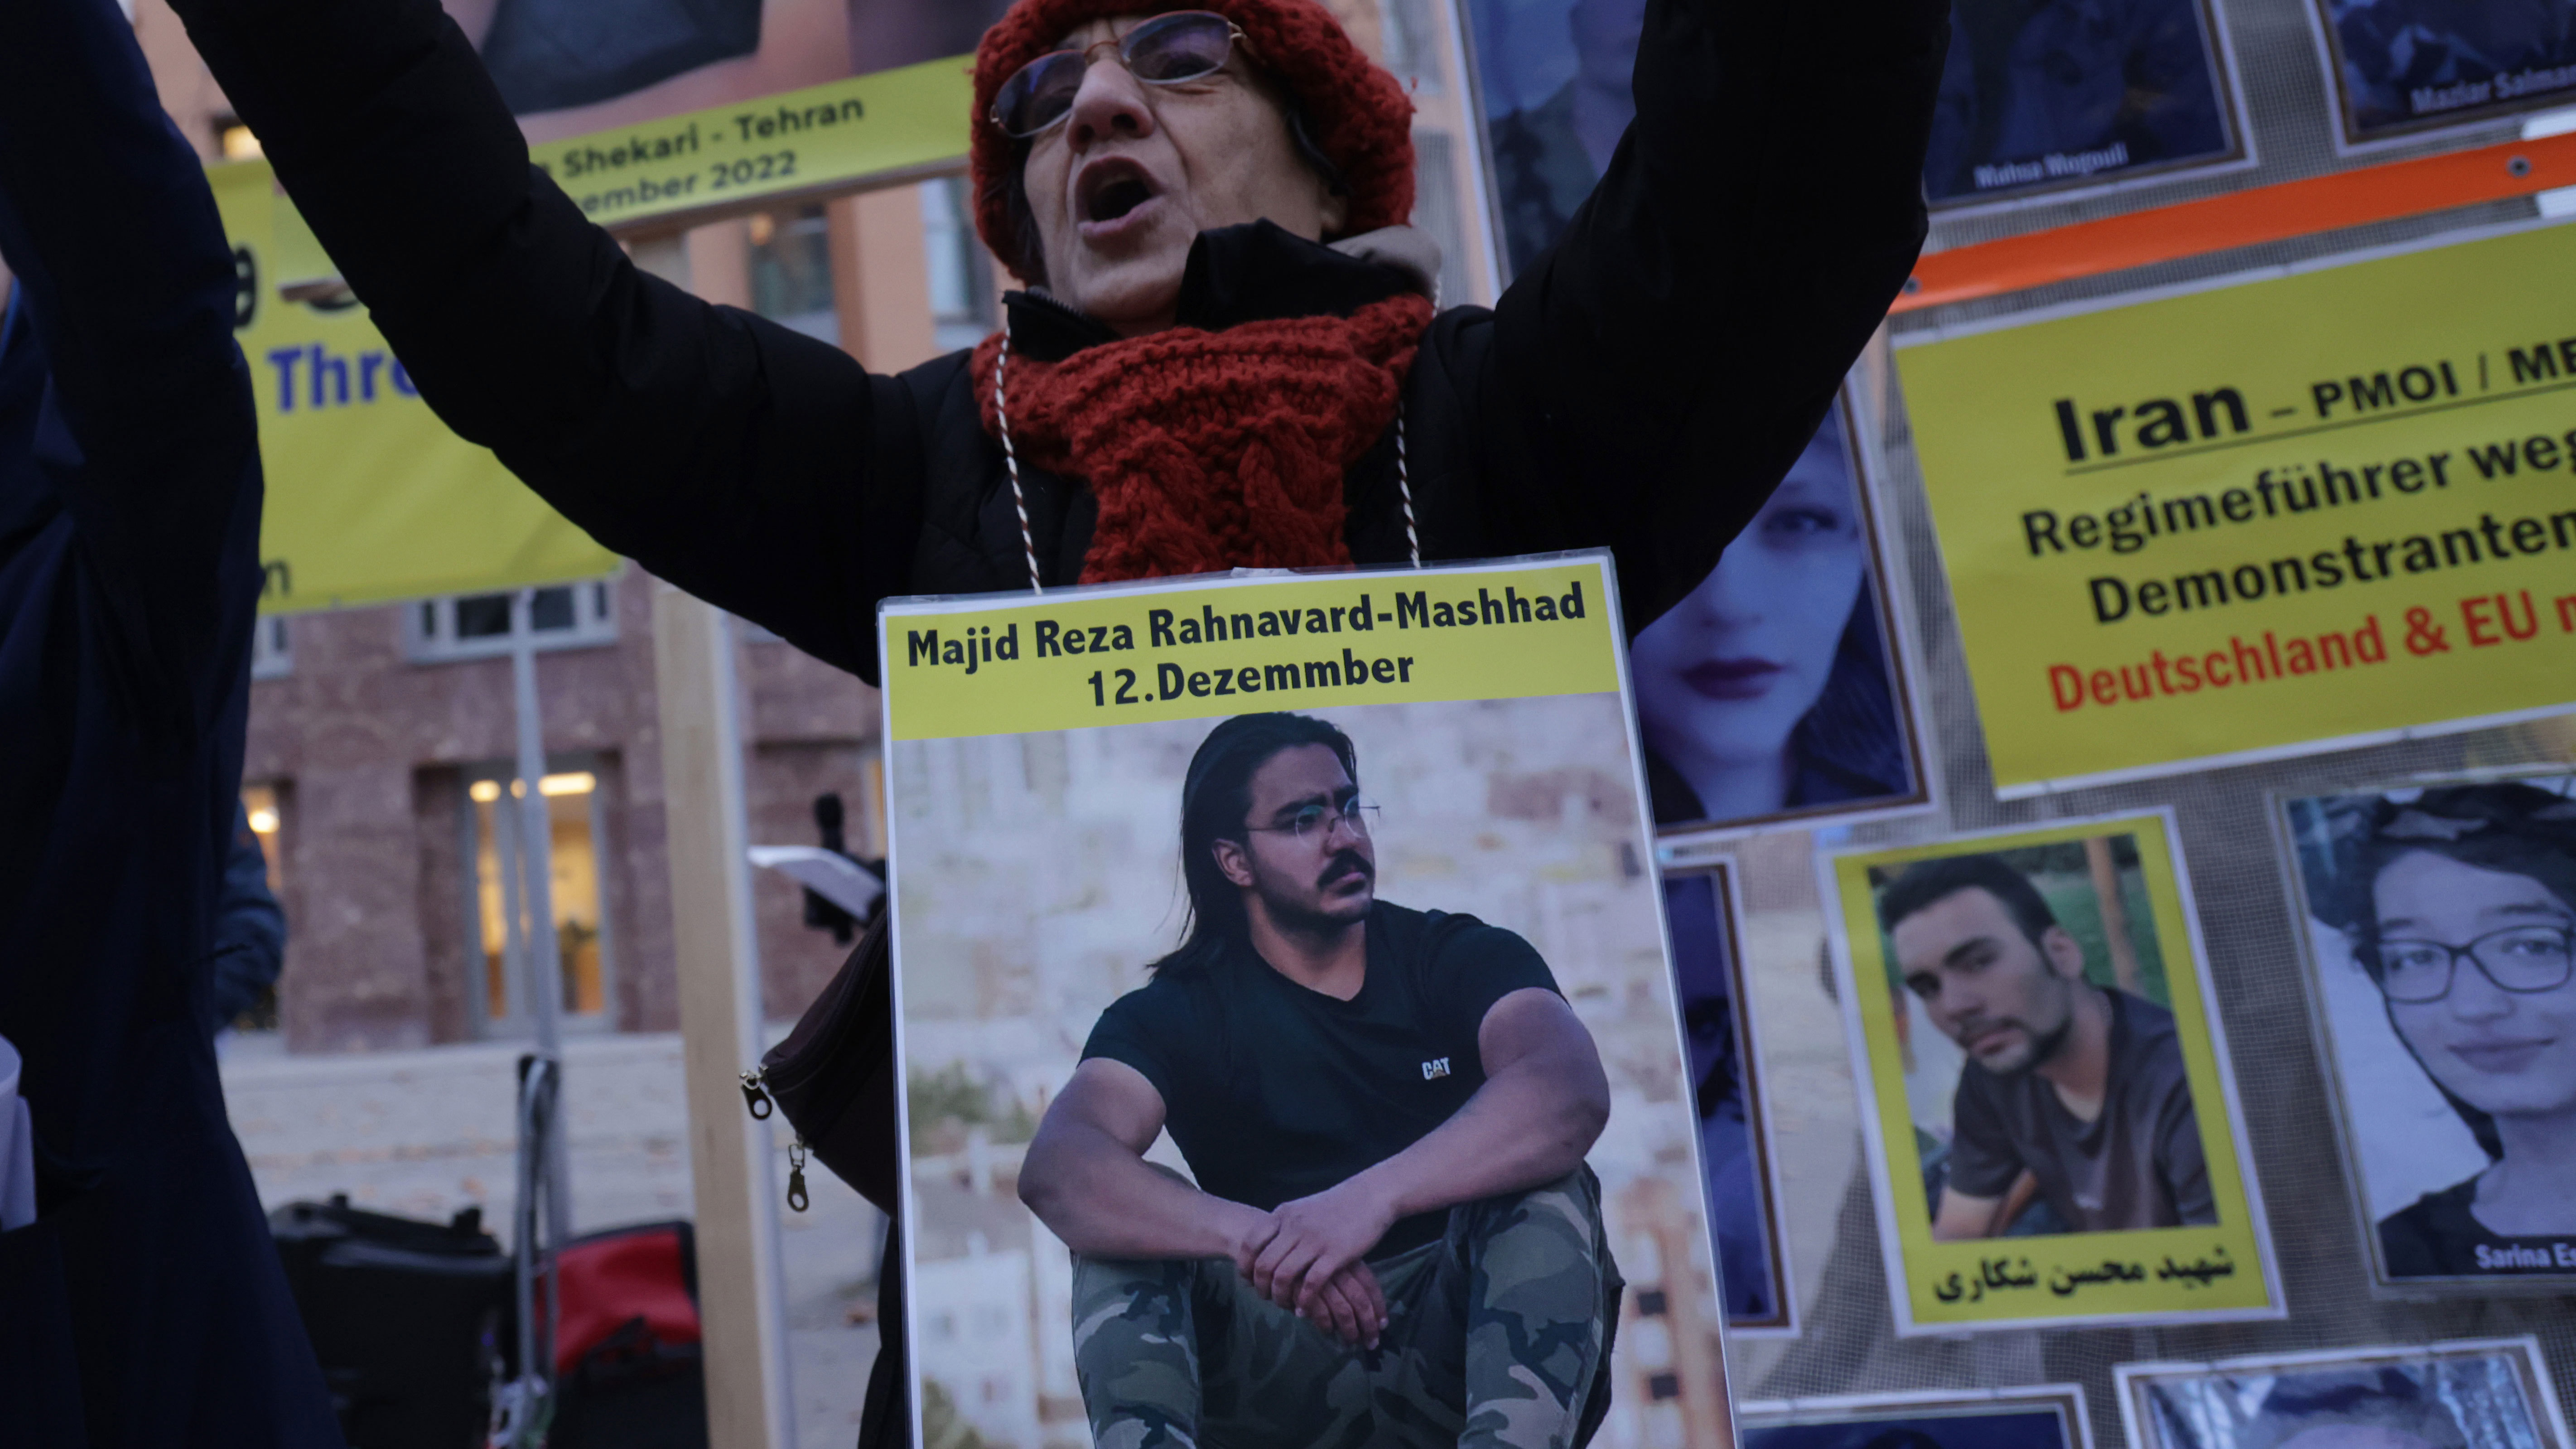 Protesters wear portraits of Majid Reza Rahnavard, 23, and Mohsen Shekari, 23, both of whom were recently executed by Iranian authorities, during a demonstration by supporters of the National Council of Resistance of Iran outside the German Foreign Ministry on December 12, 2022 in Berlin, Germany